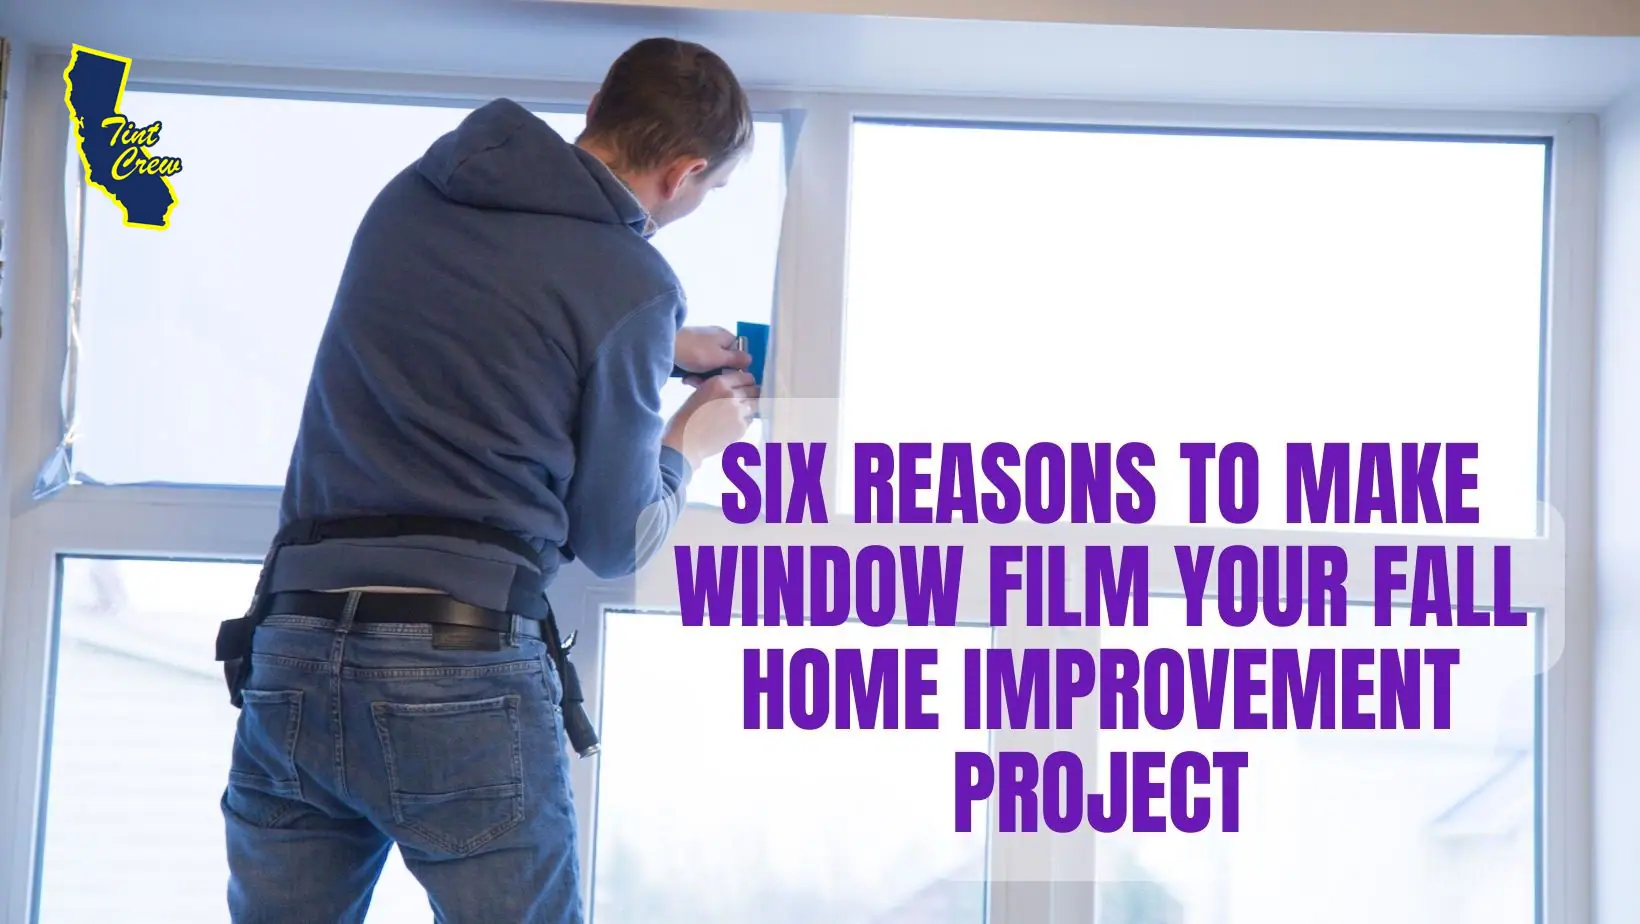 Six Reasons to Make Window Film Your Fall Home Improvement Project